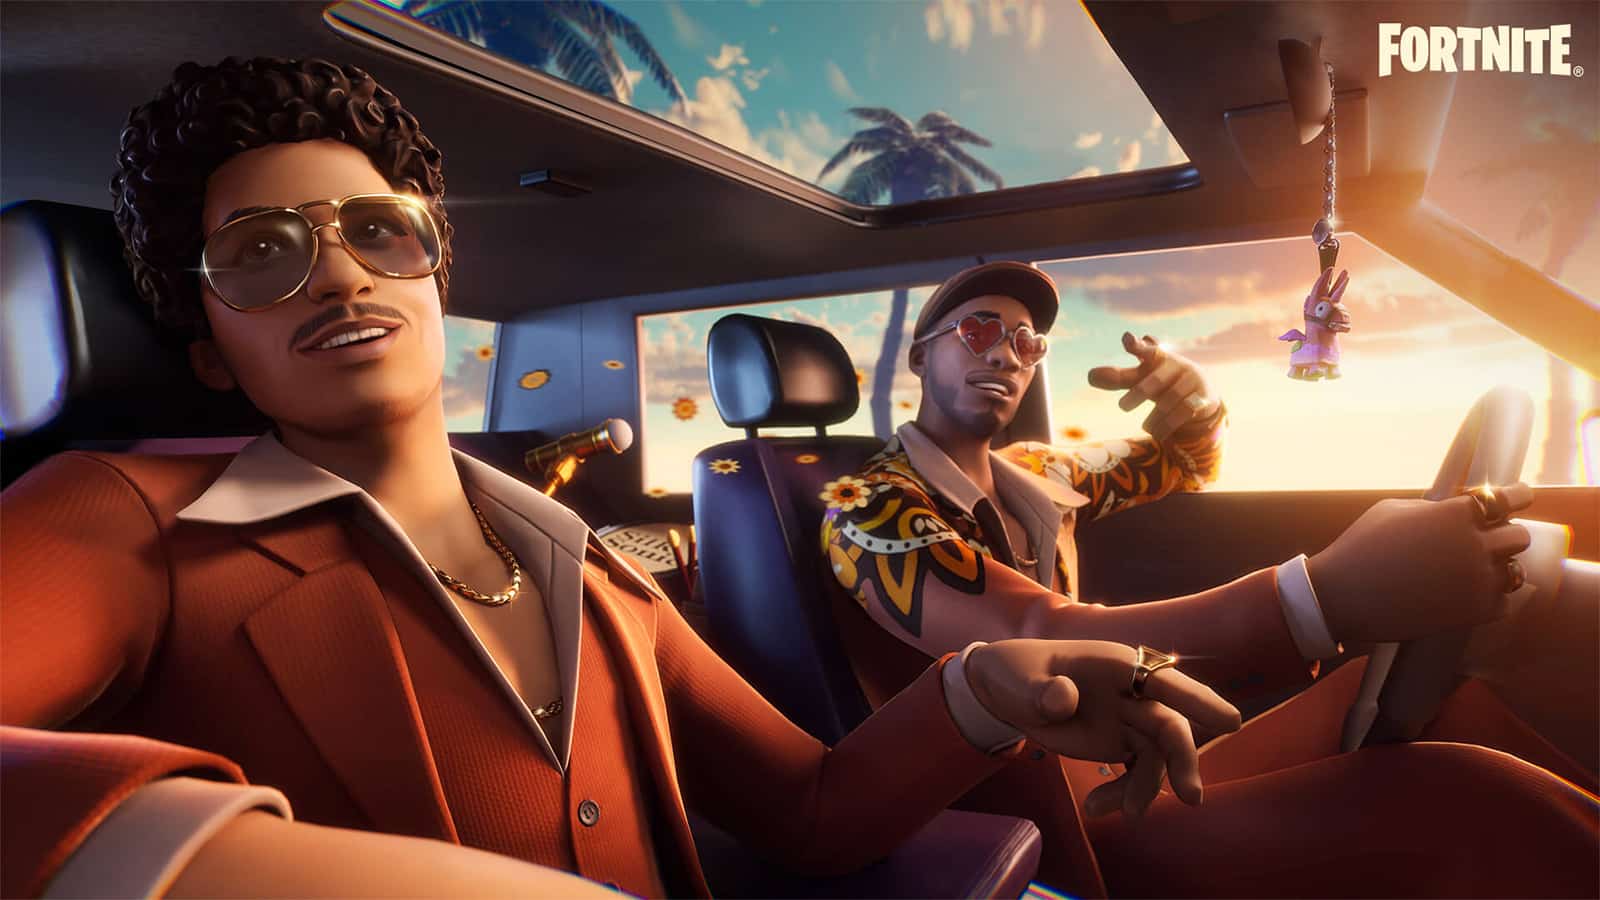 Bruno Mars And Anderson .Paak Are Coming To Fortnite